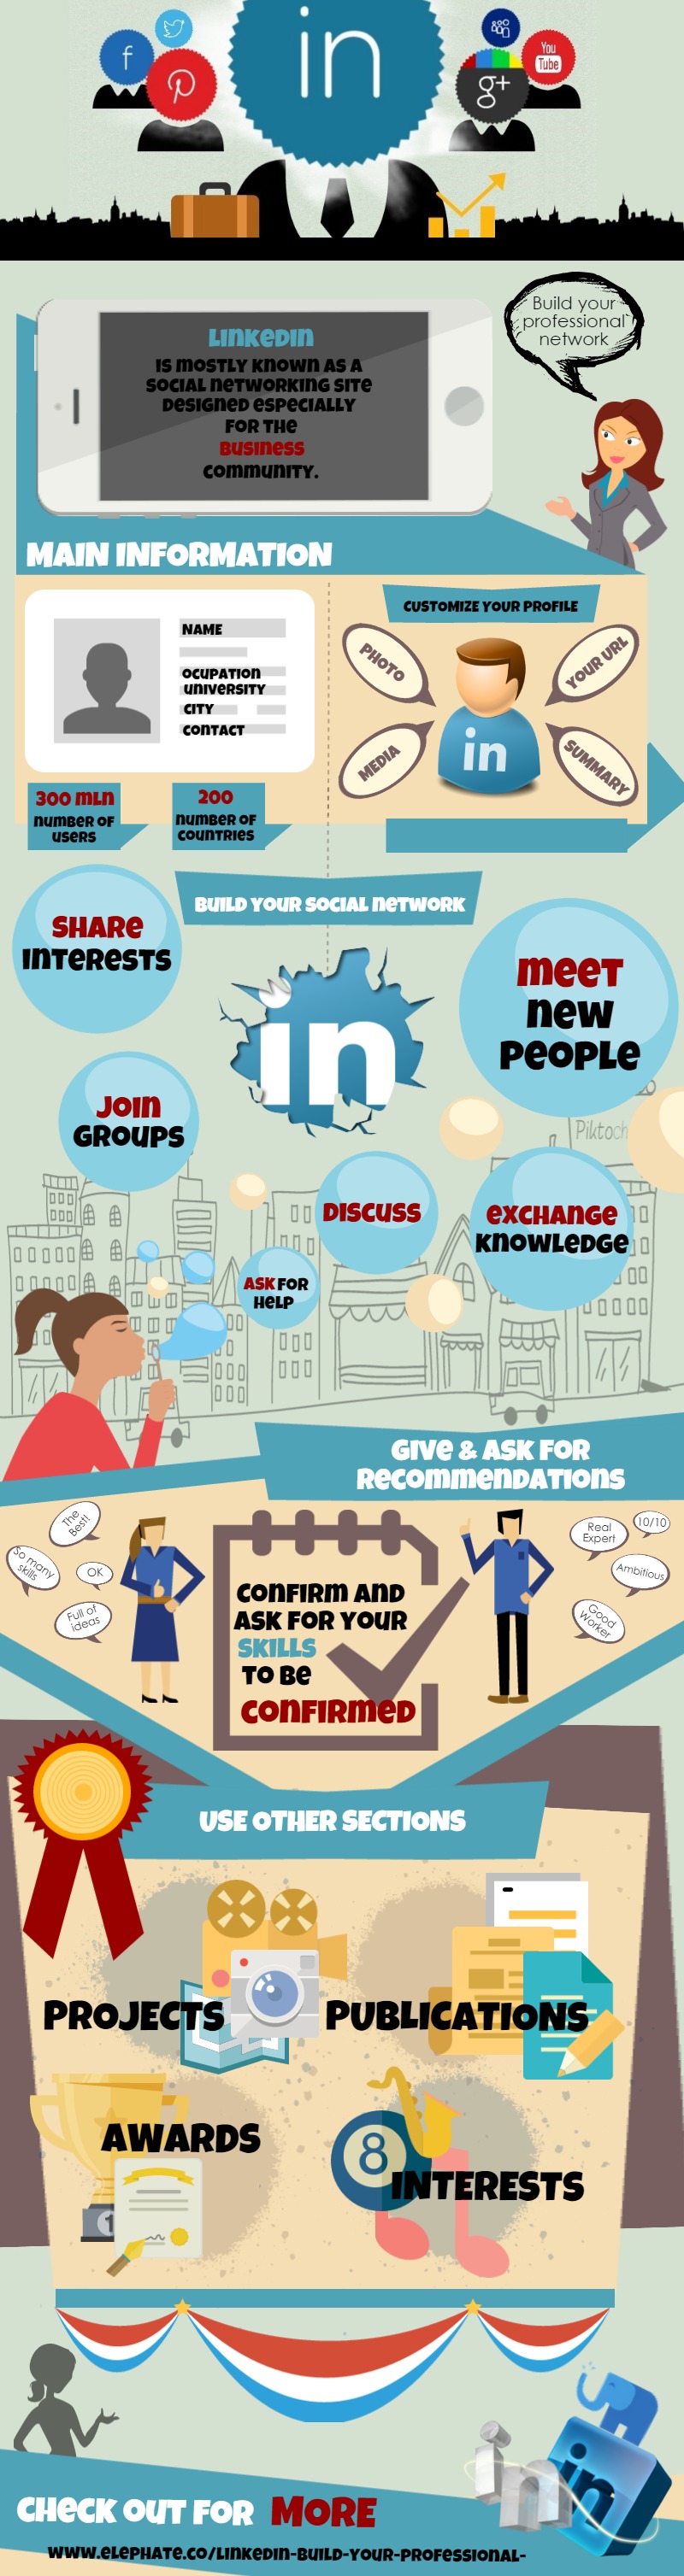 LinkedIn – build your professional network